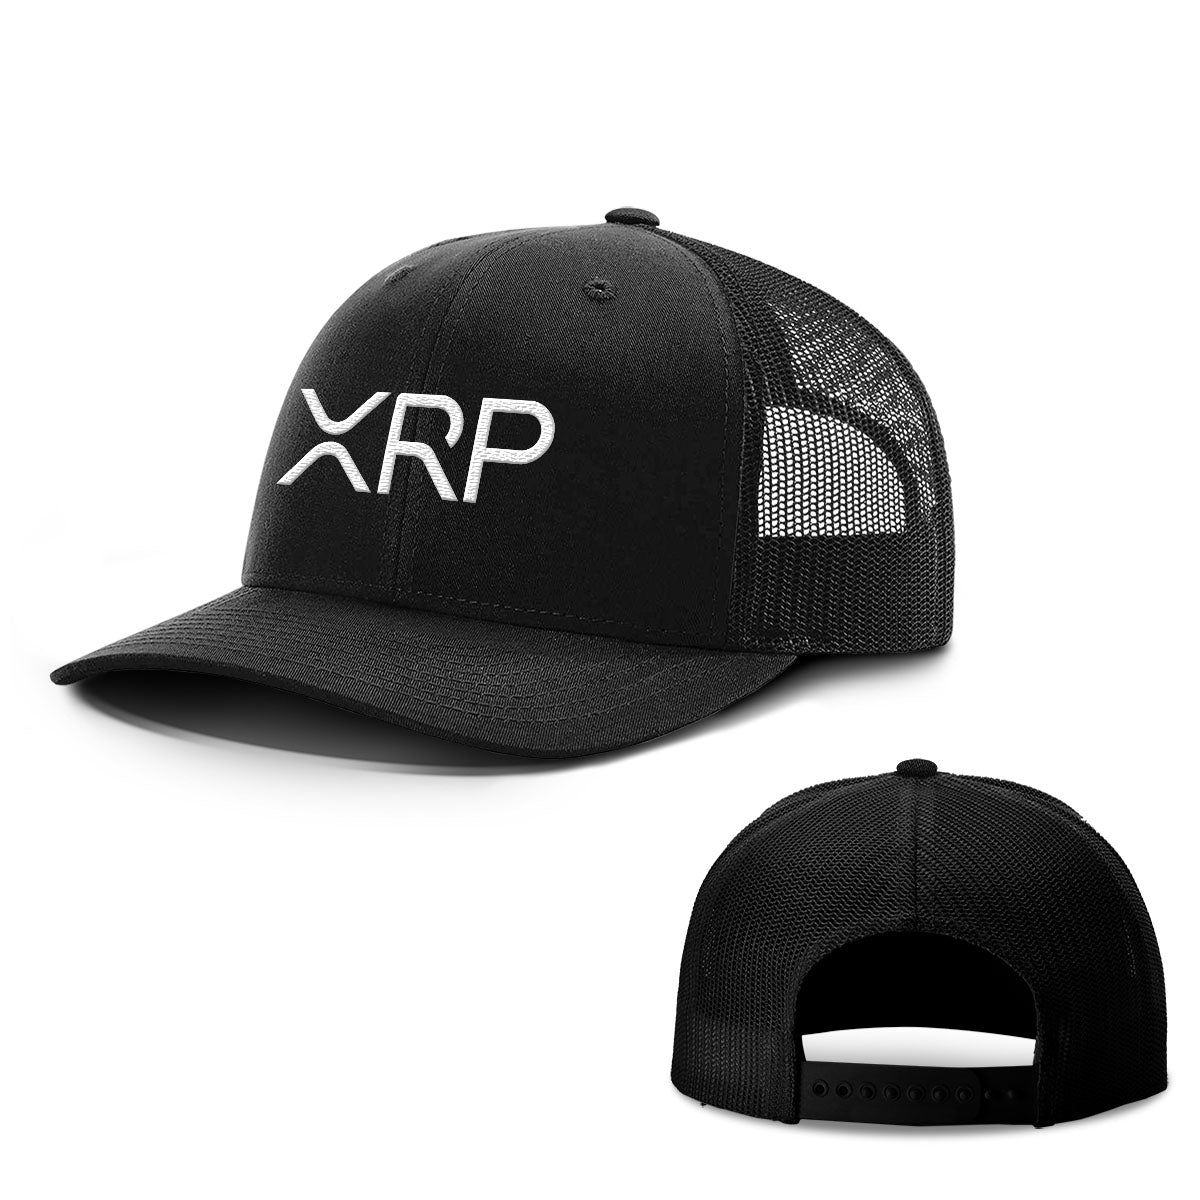 XRP Hats - BustedTees.com